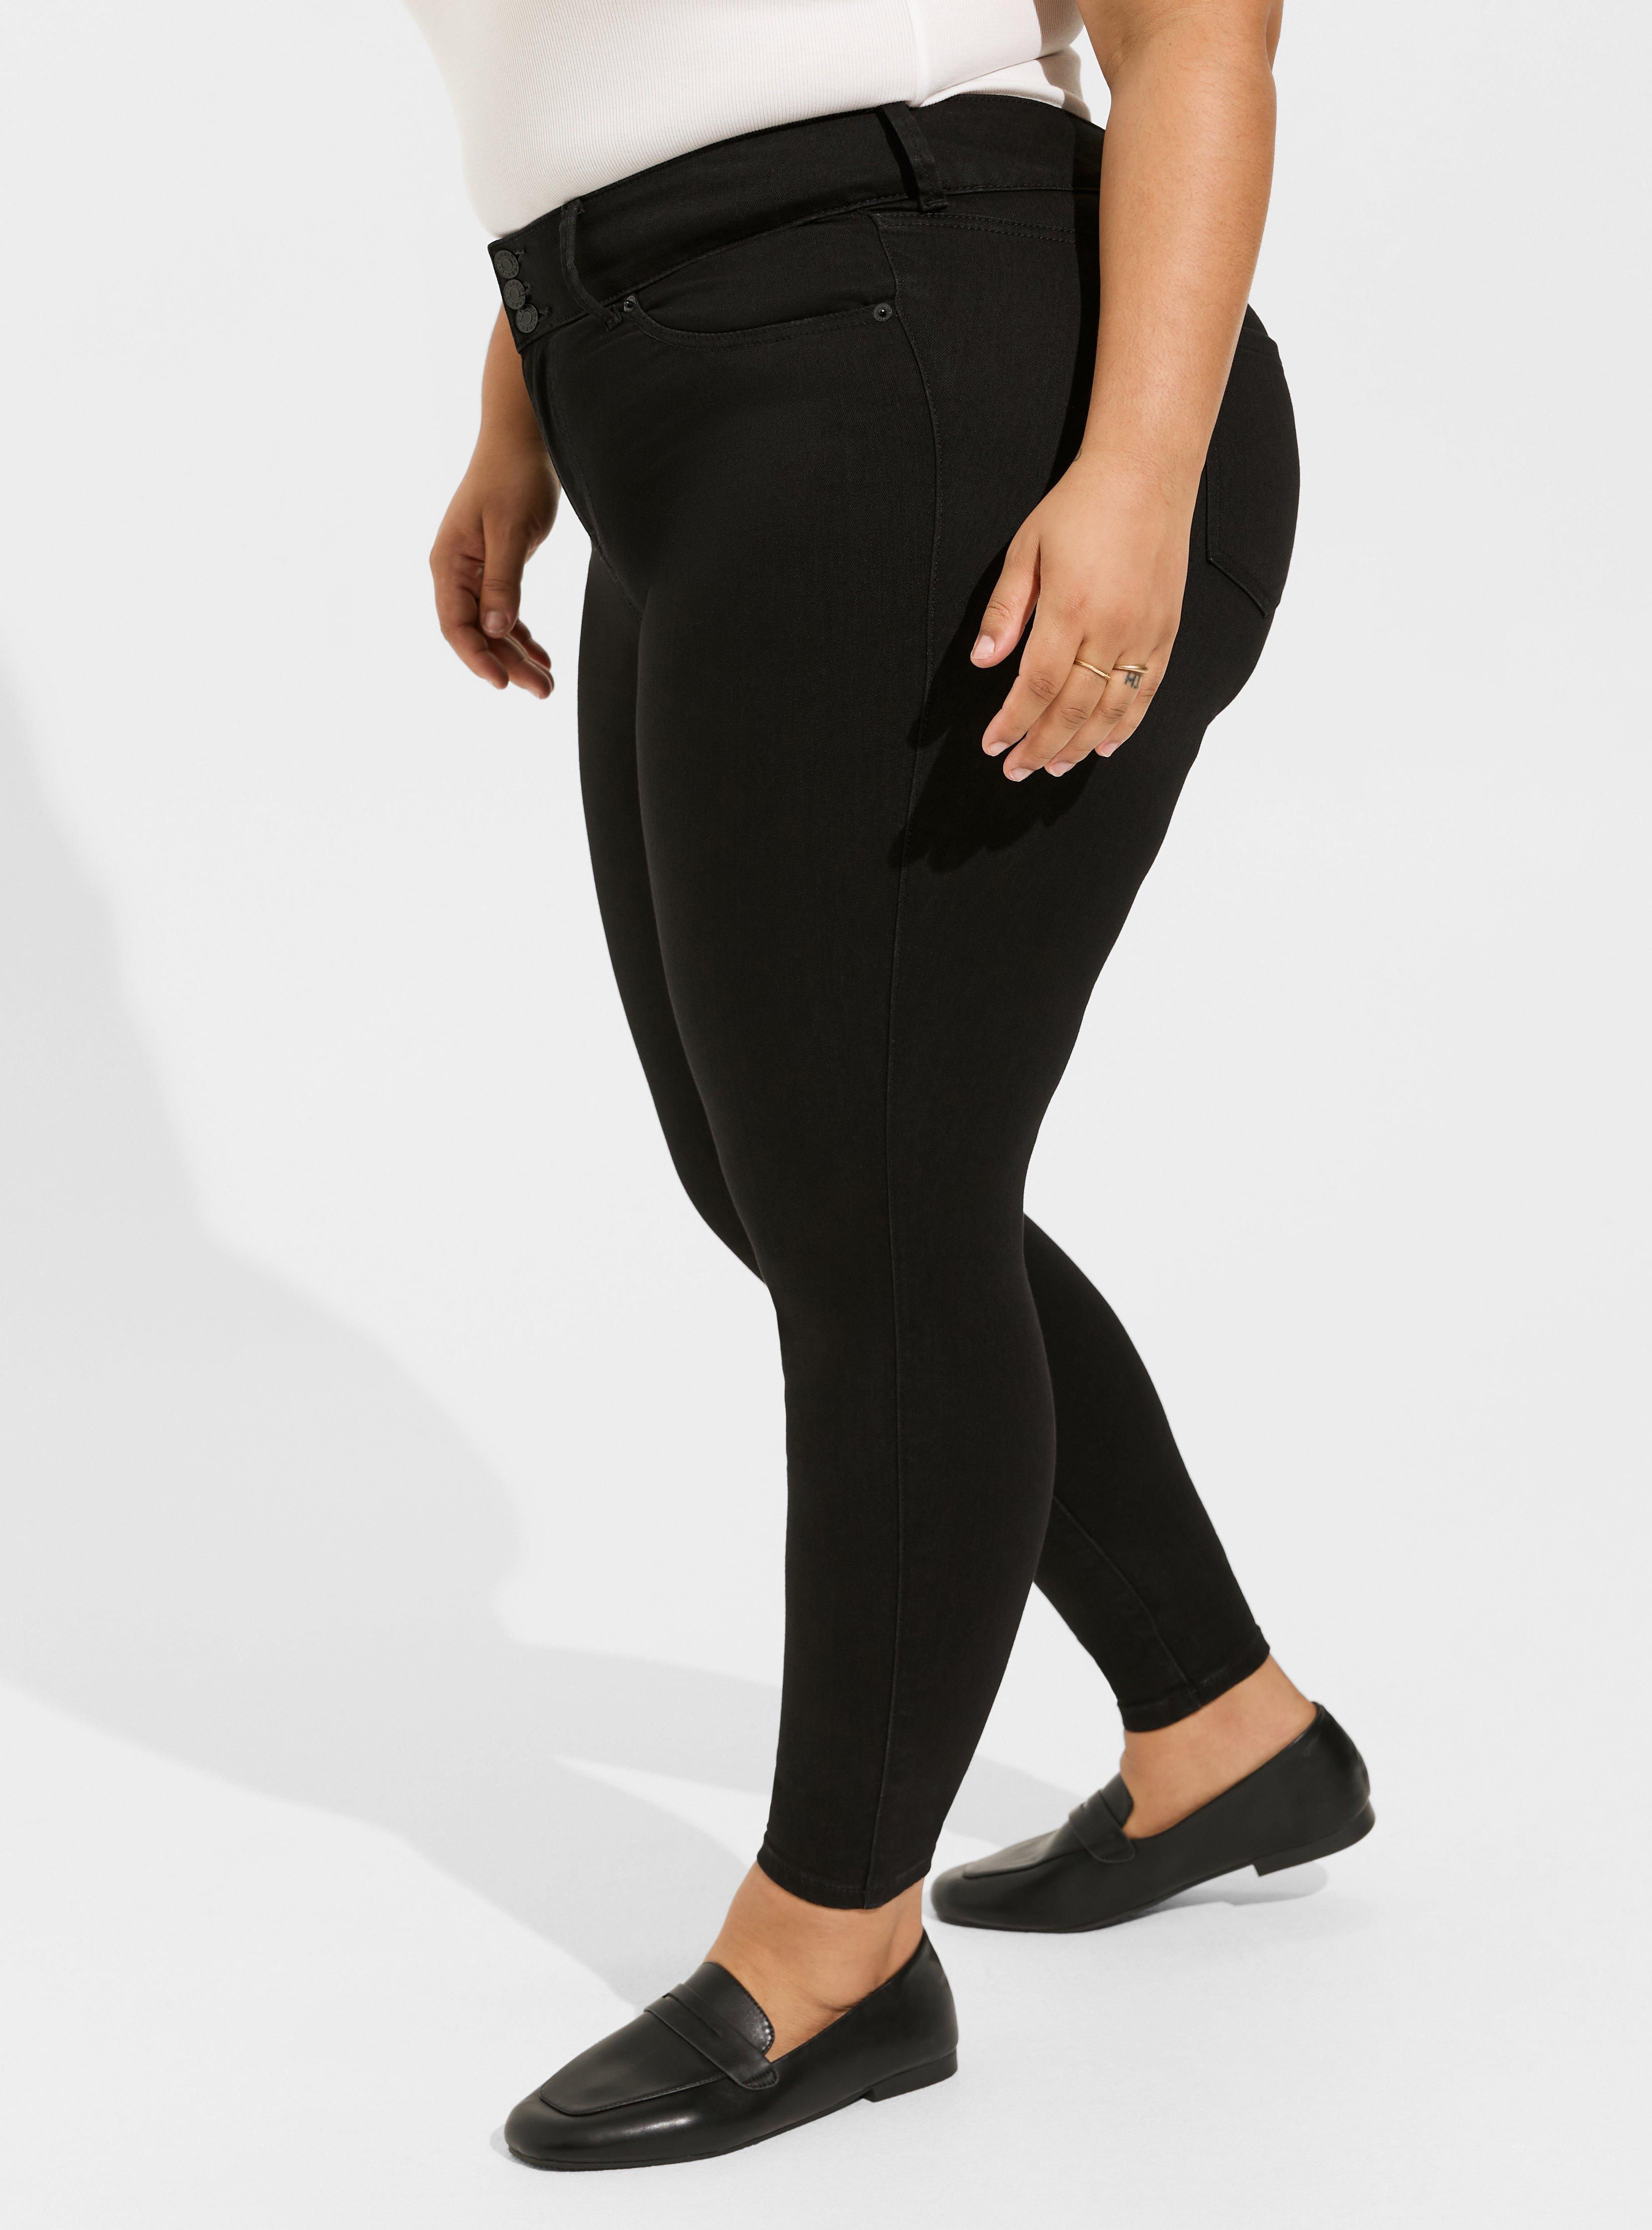 Stretch Denim Jeggings - black jegging jeans with a high waist